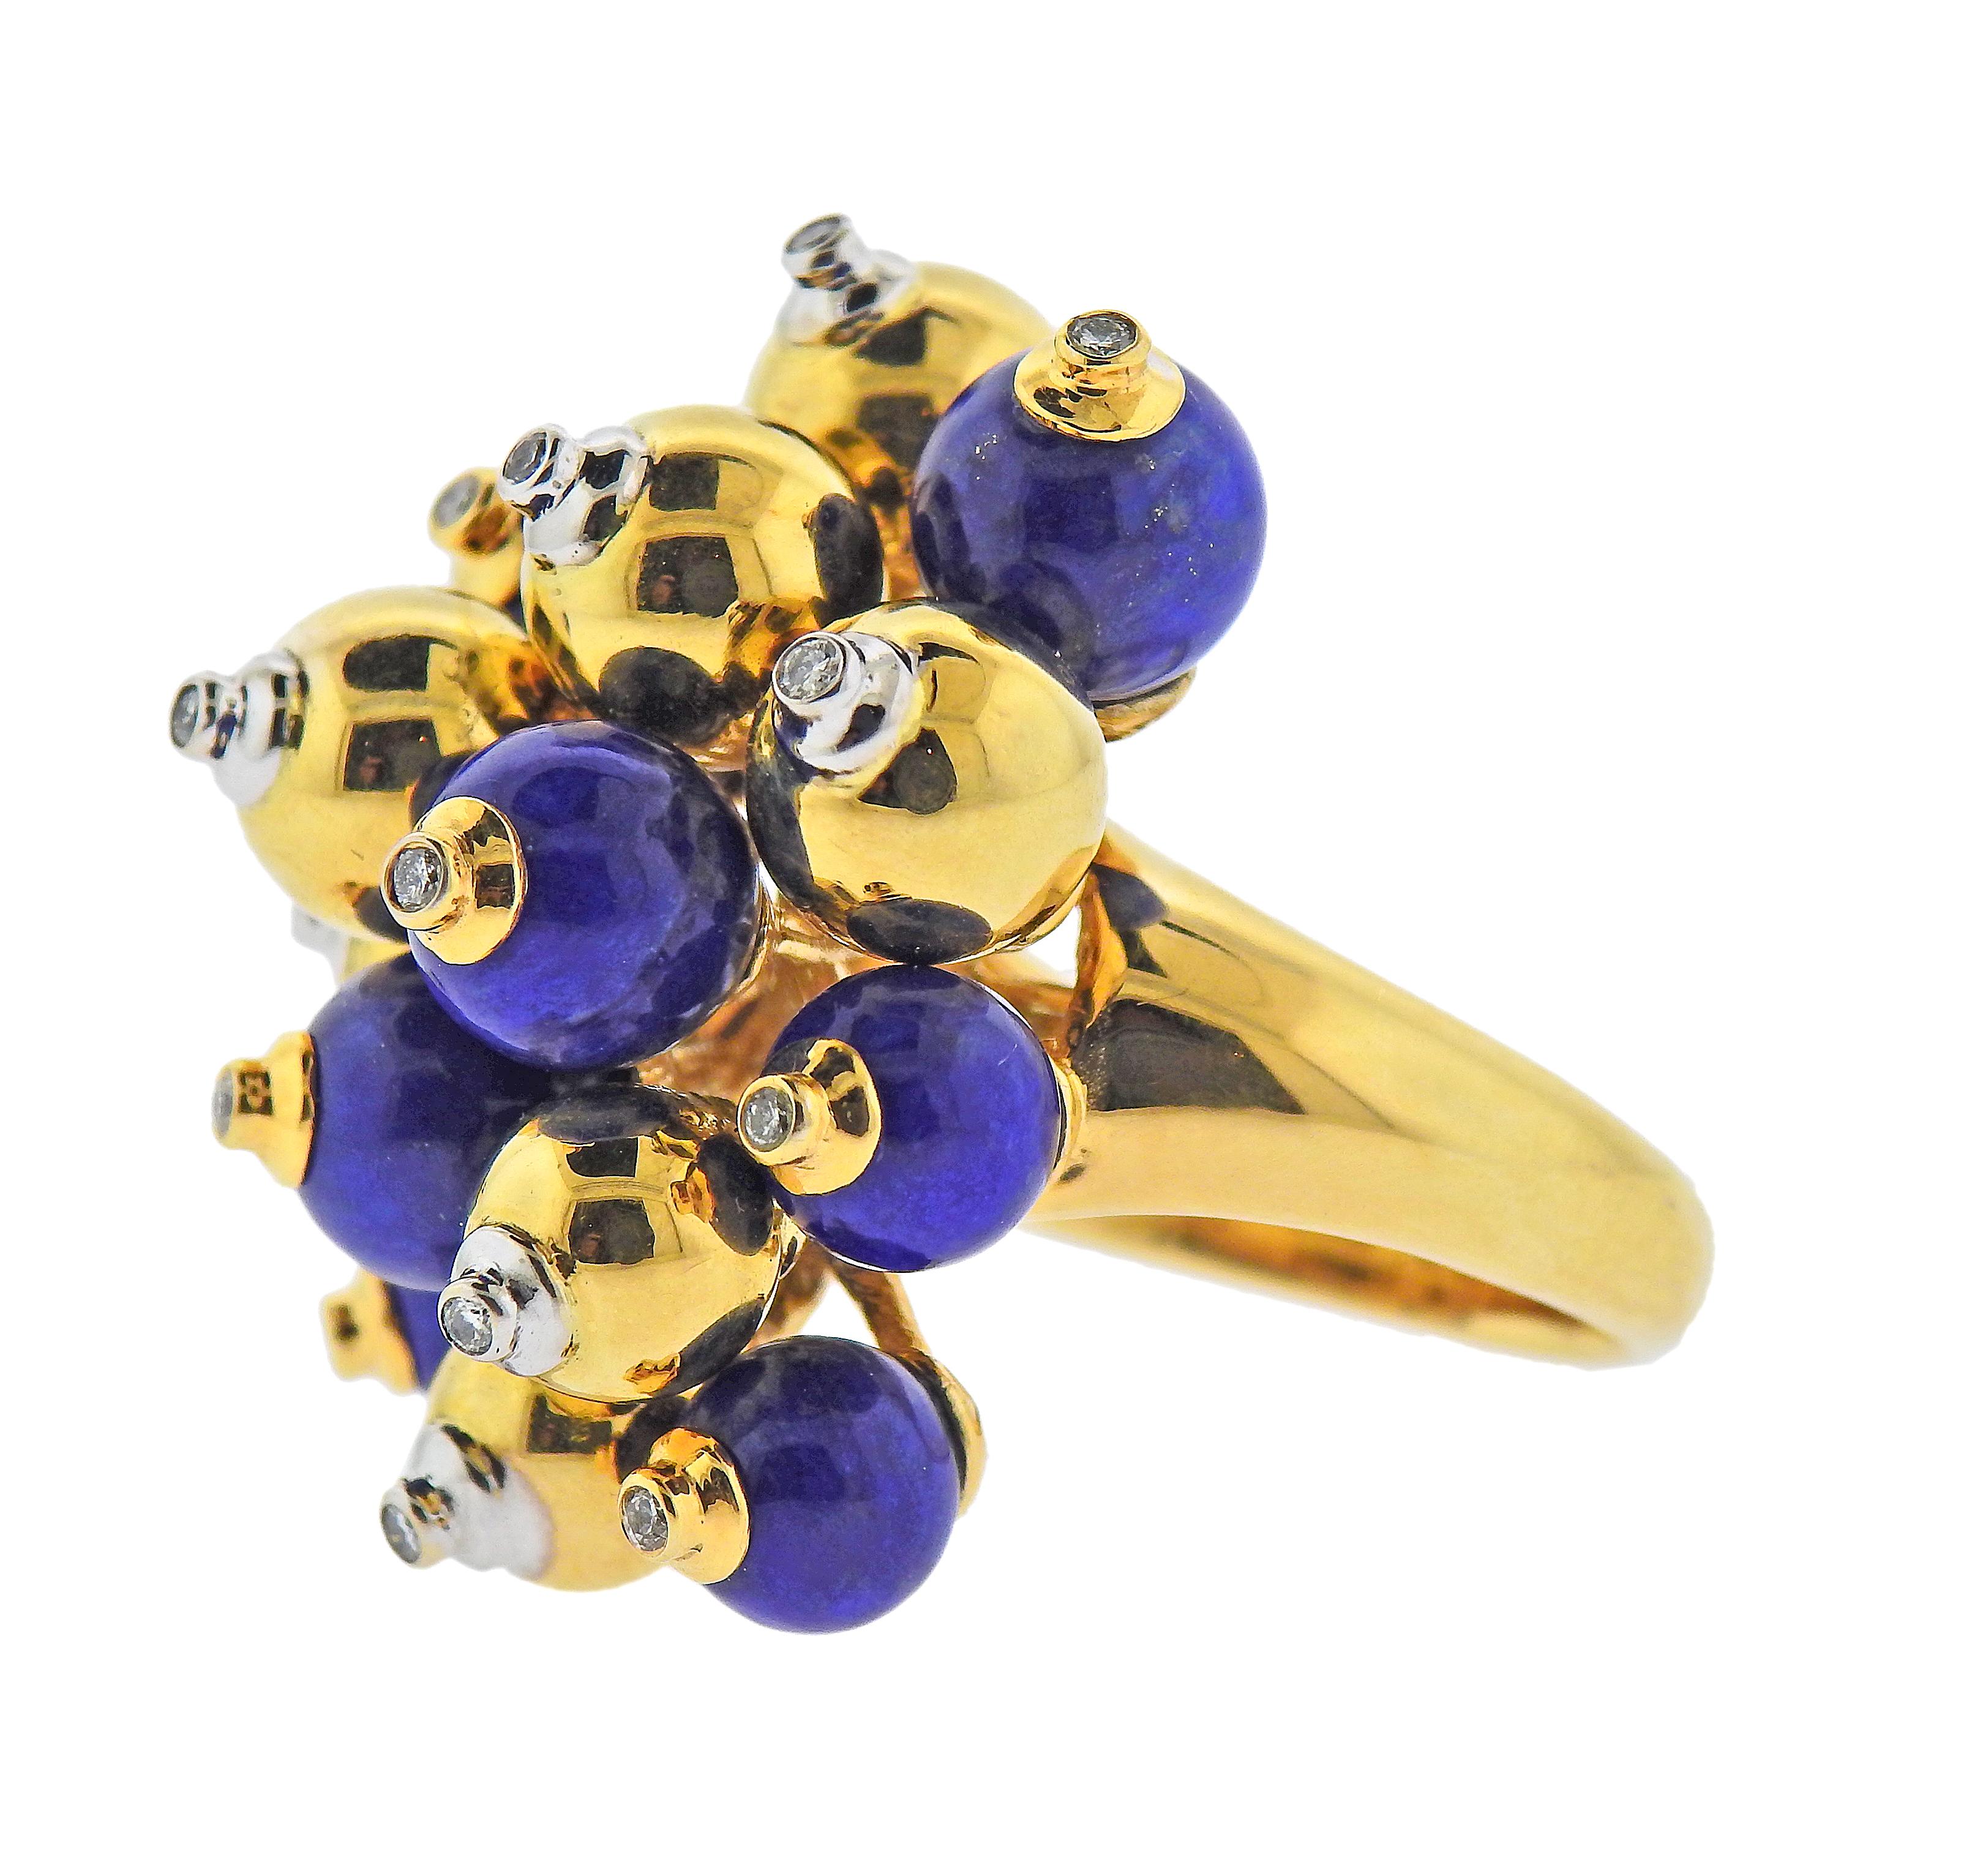 18k yellow gold cocktail ring, with 7.5mm lapis lazuli and gold balls, each set with a diamond in the center, total approx. 0.14ctw. Ring size - 7, ring top - 32mm x 25mm. Marked: 750. Weight - 22 grams. 